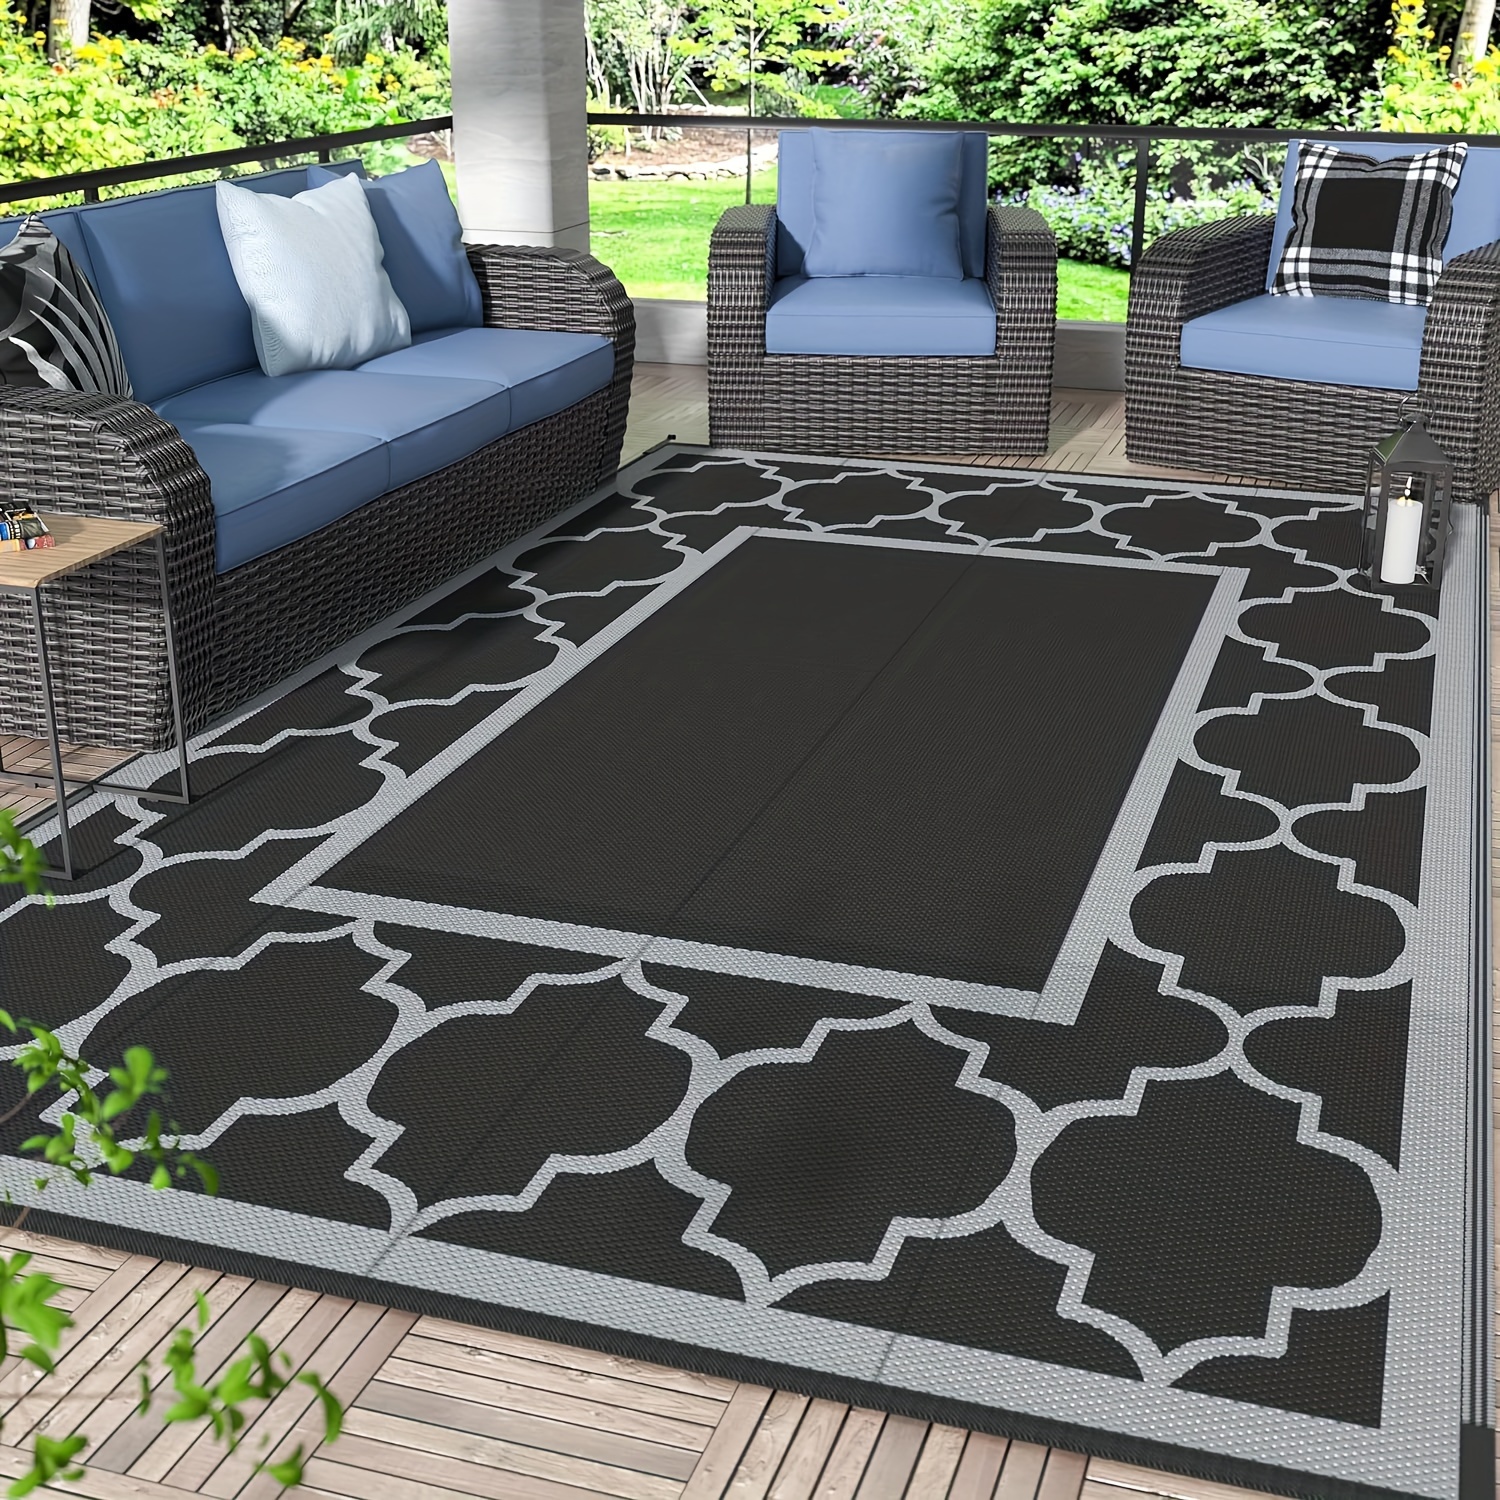 

Outdoor Rug For Patio Clearance, Waterproof Large Mat, Reversible Plastic Camping Rugs Porch, Deck, Camper, Balcony, Backyard, Black & White